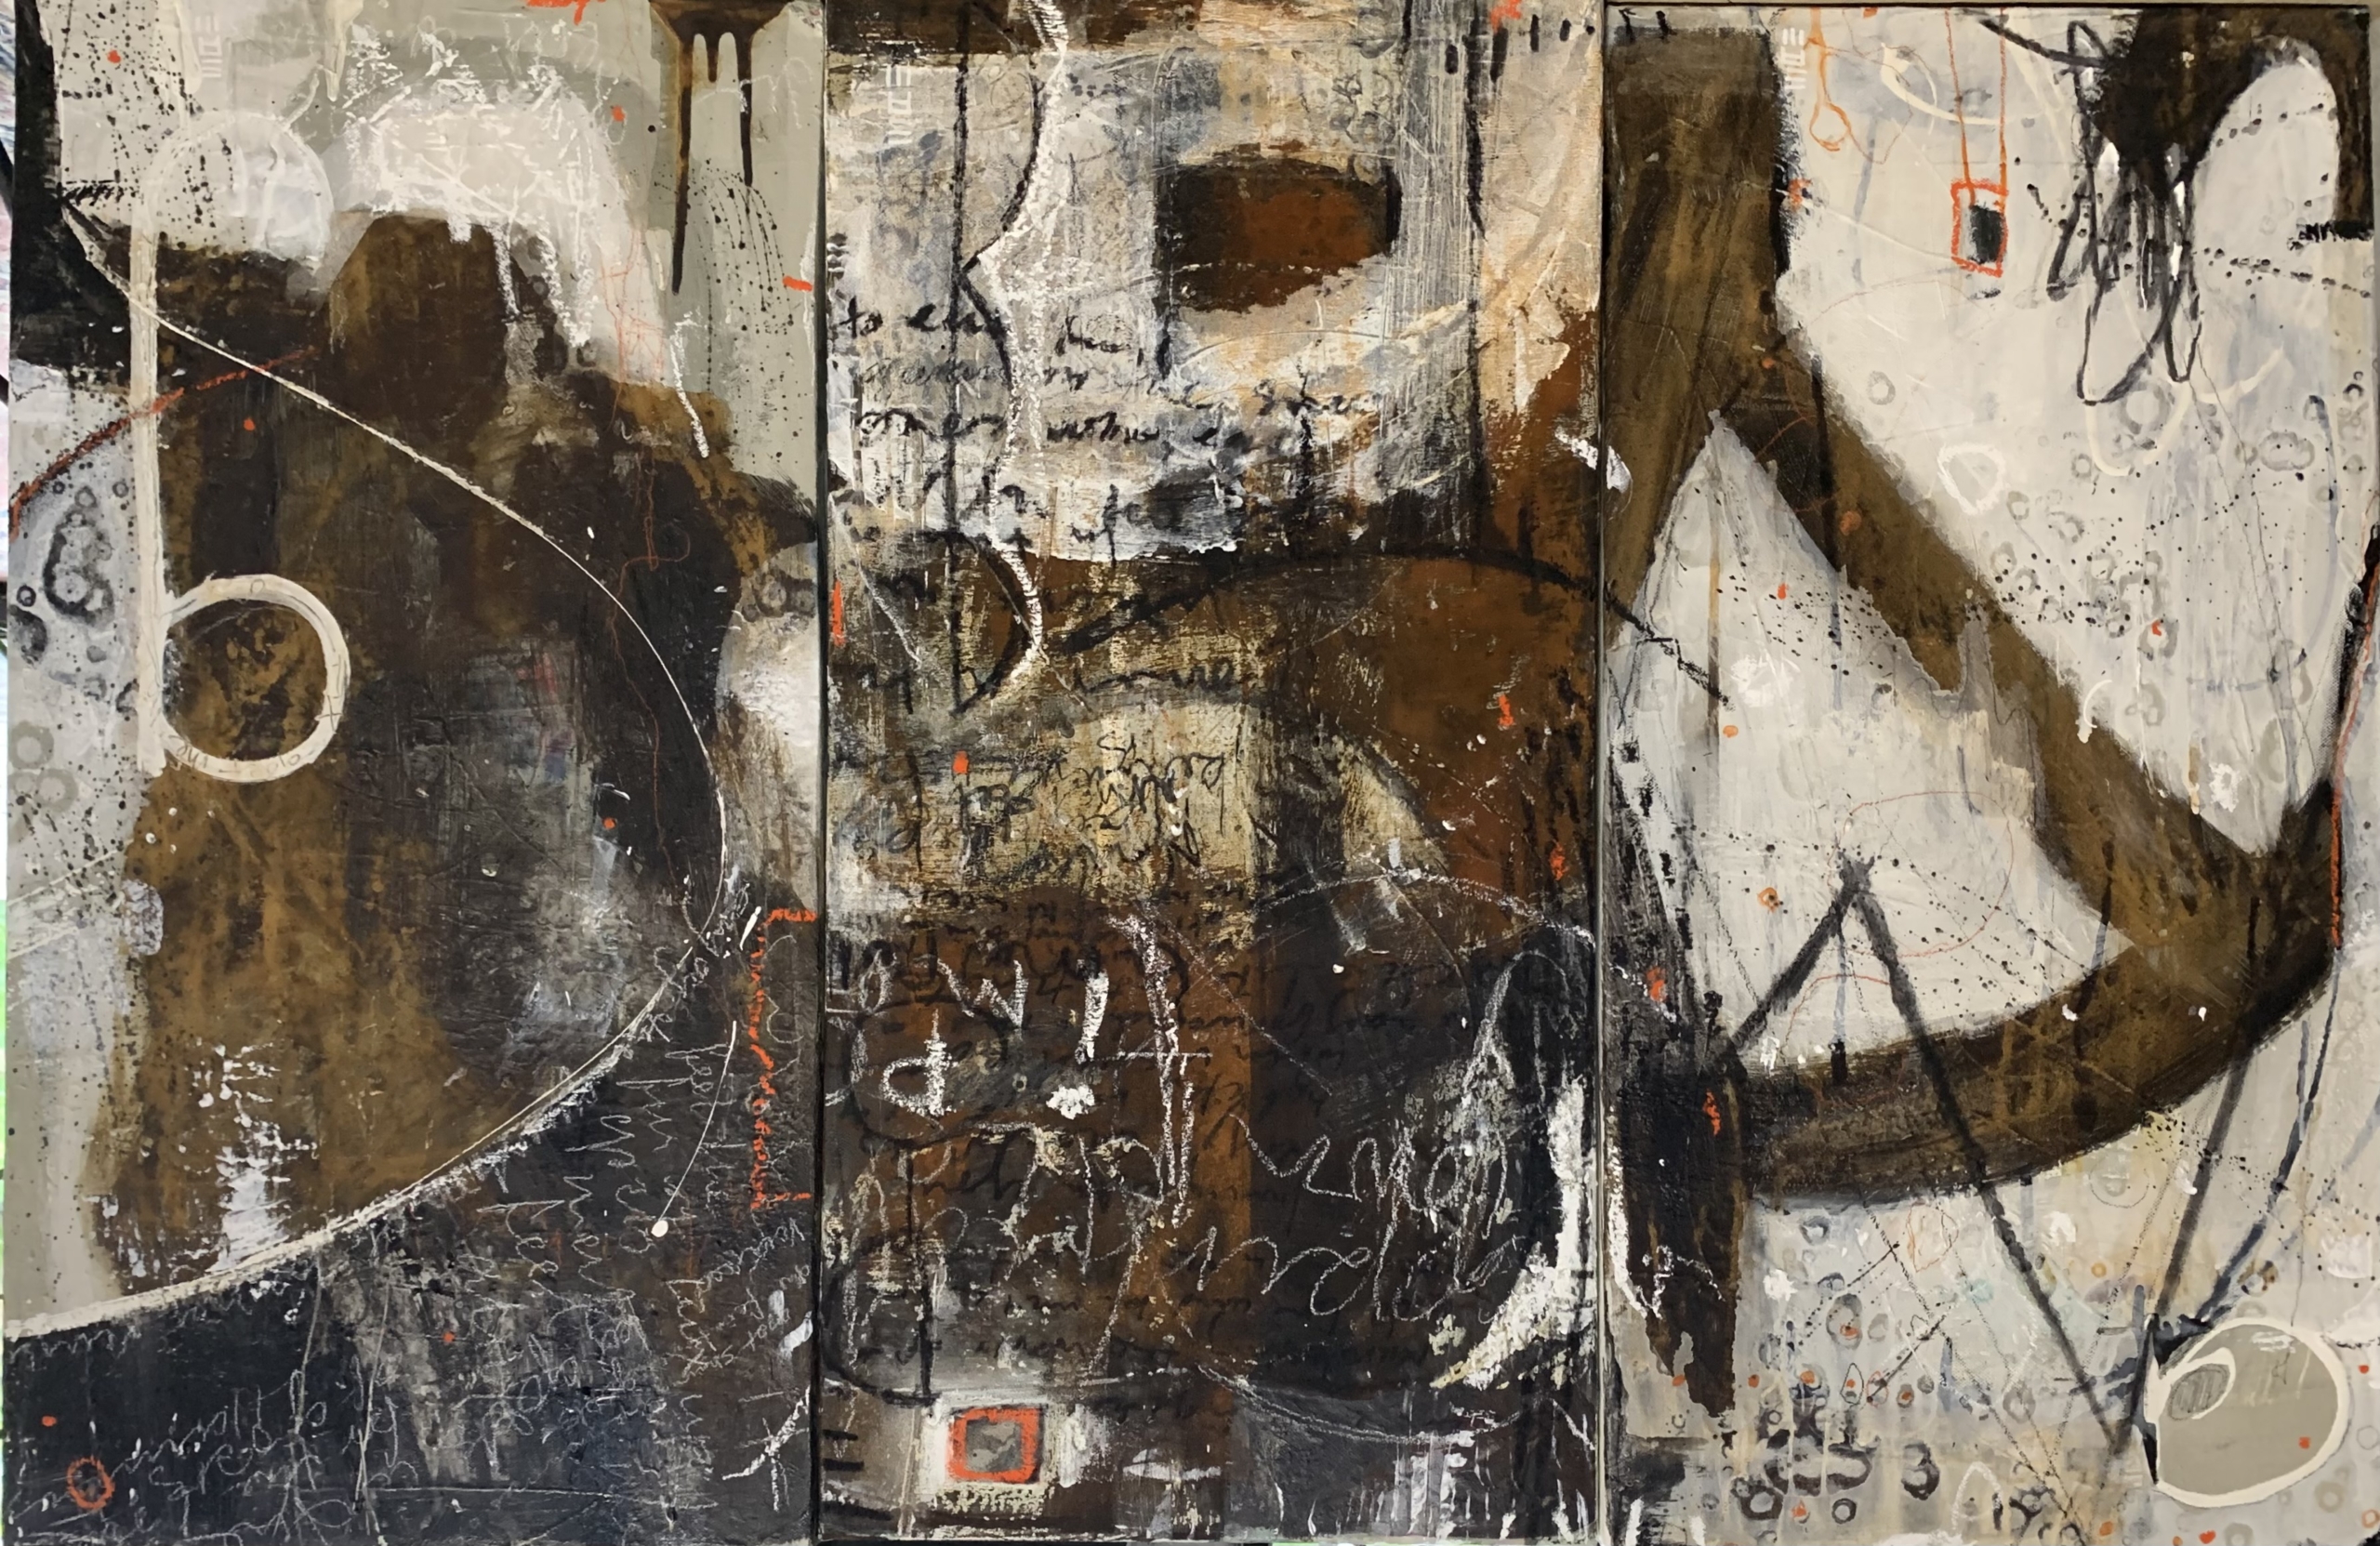 Scorched (triptych), mixed media on canvas by Samantha Gardiner